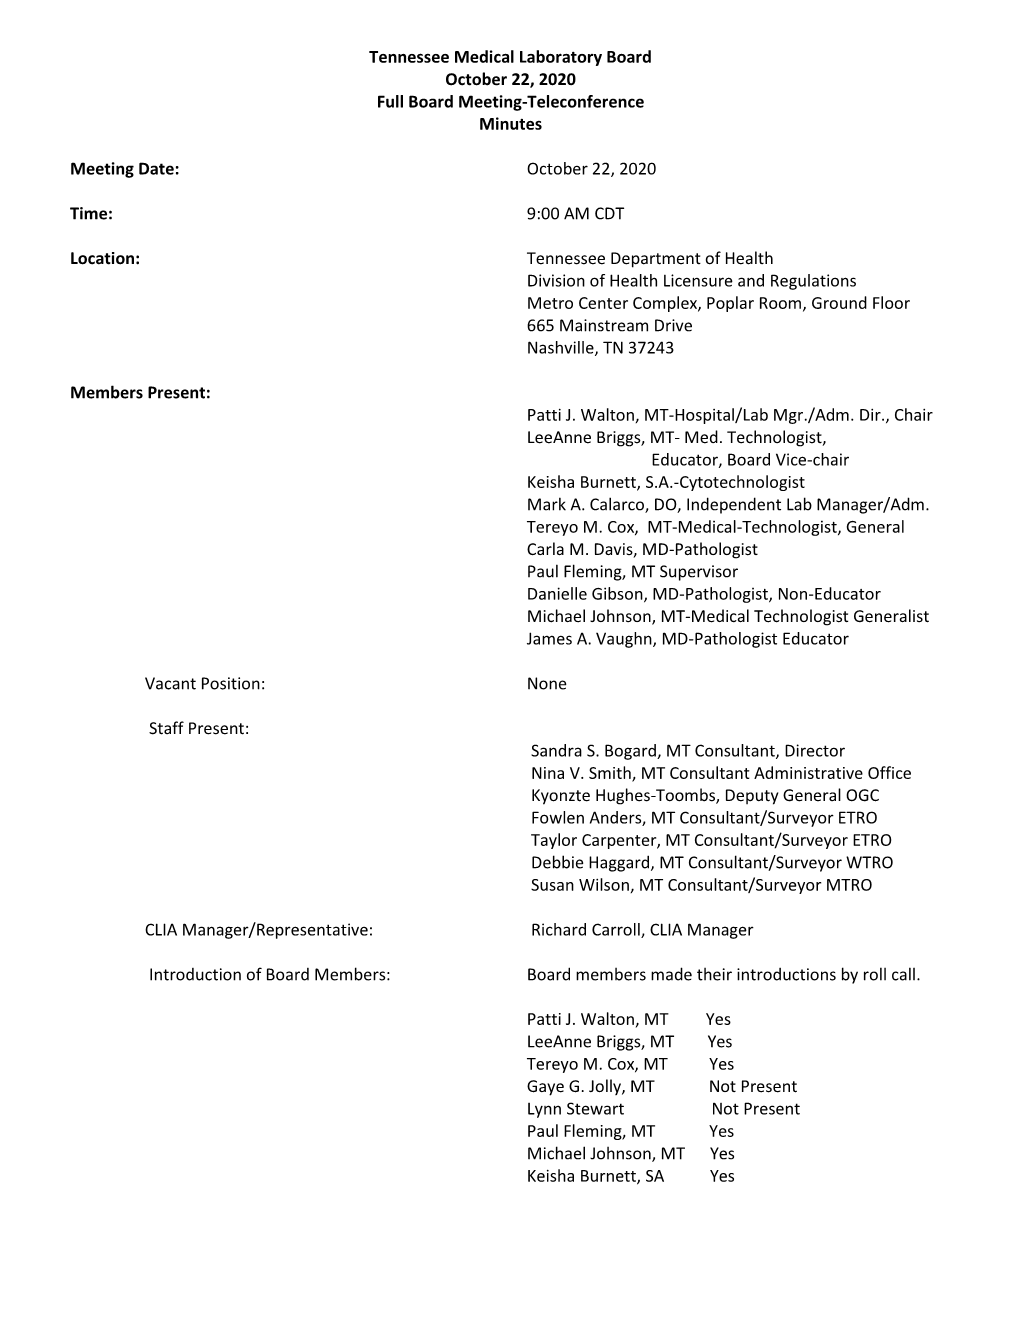 Tennessee Medical Laboratory Board October 22, 2020 Full Board Meeting-Teleconference Minutes Meeting Date